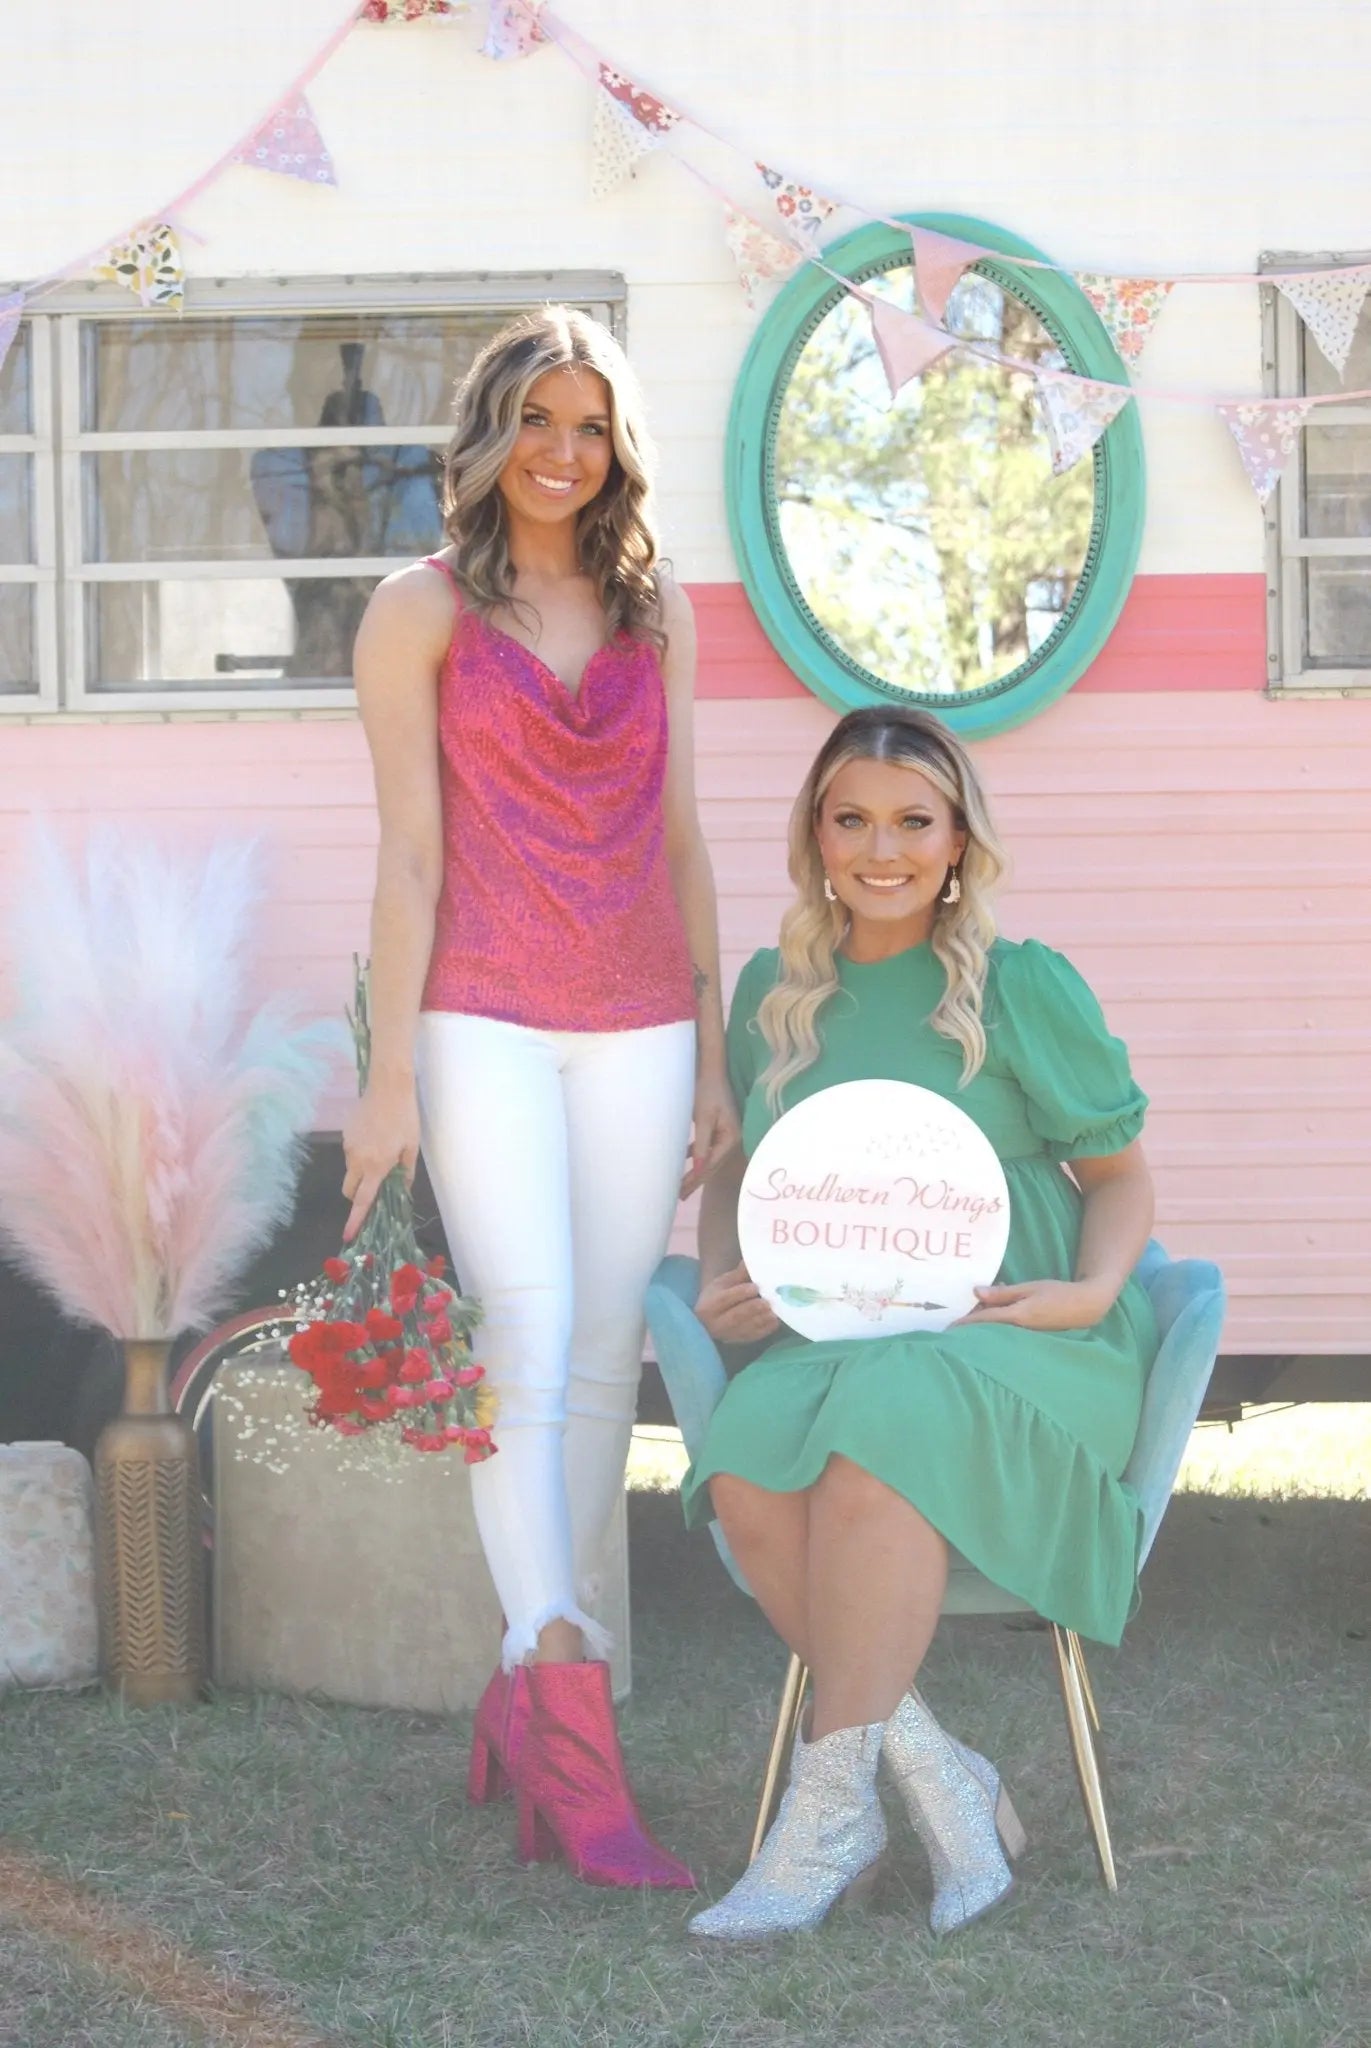 Two female business owners in front of their mobile boutique holding a custom business logo sign.